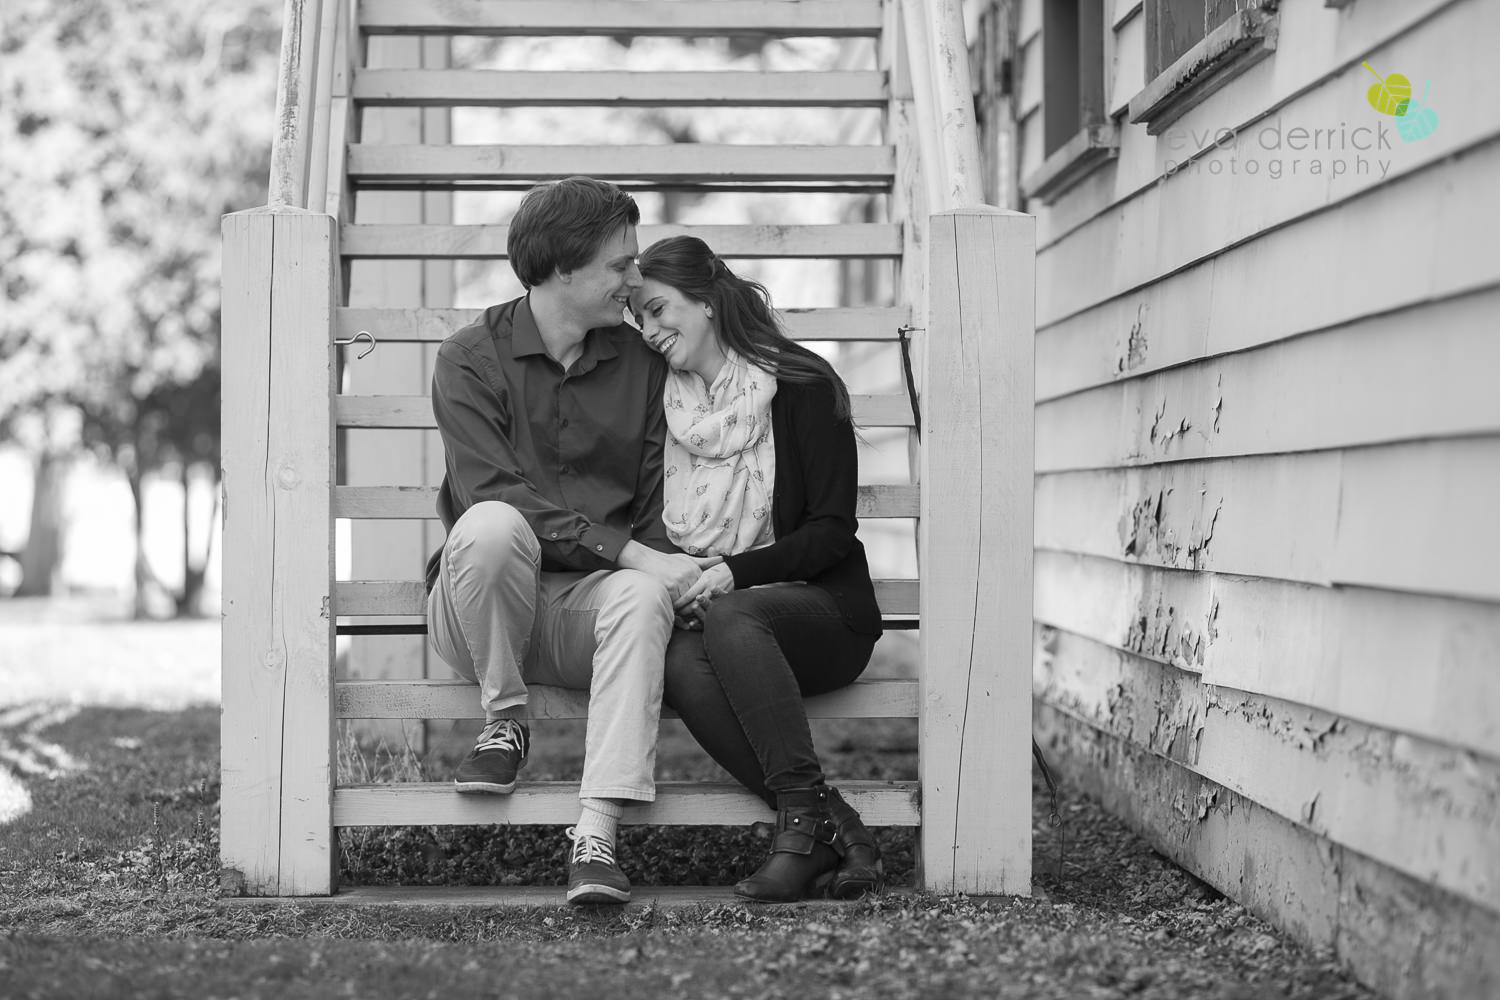 Niagara-on-the-Lake-Engagement-Session-photography-by-Eva-Derrick-Photography-010.JPG